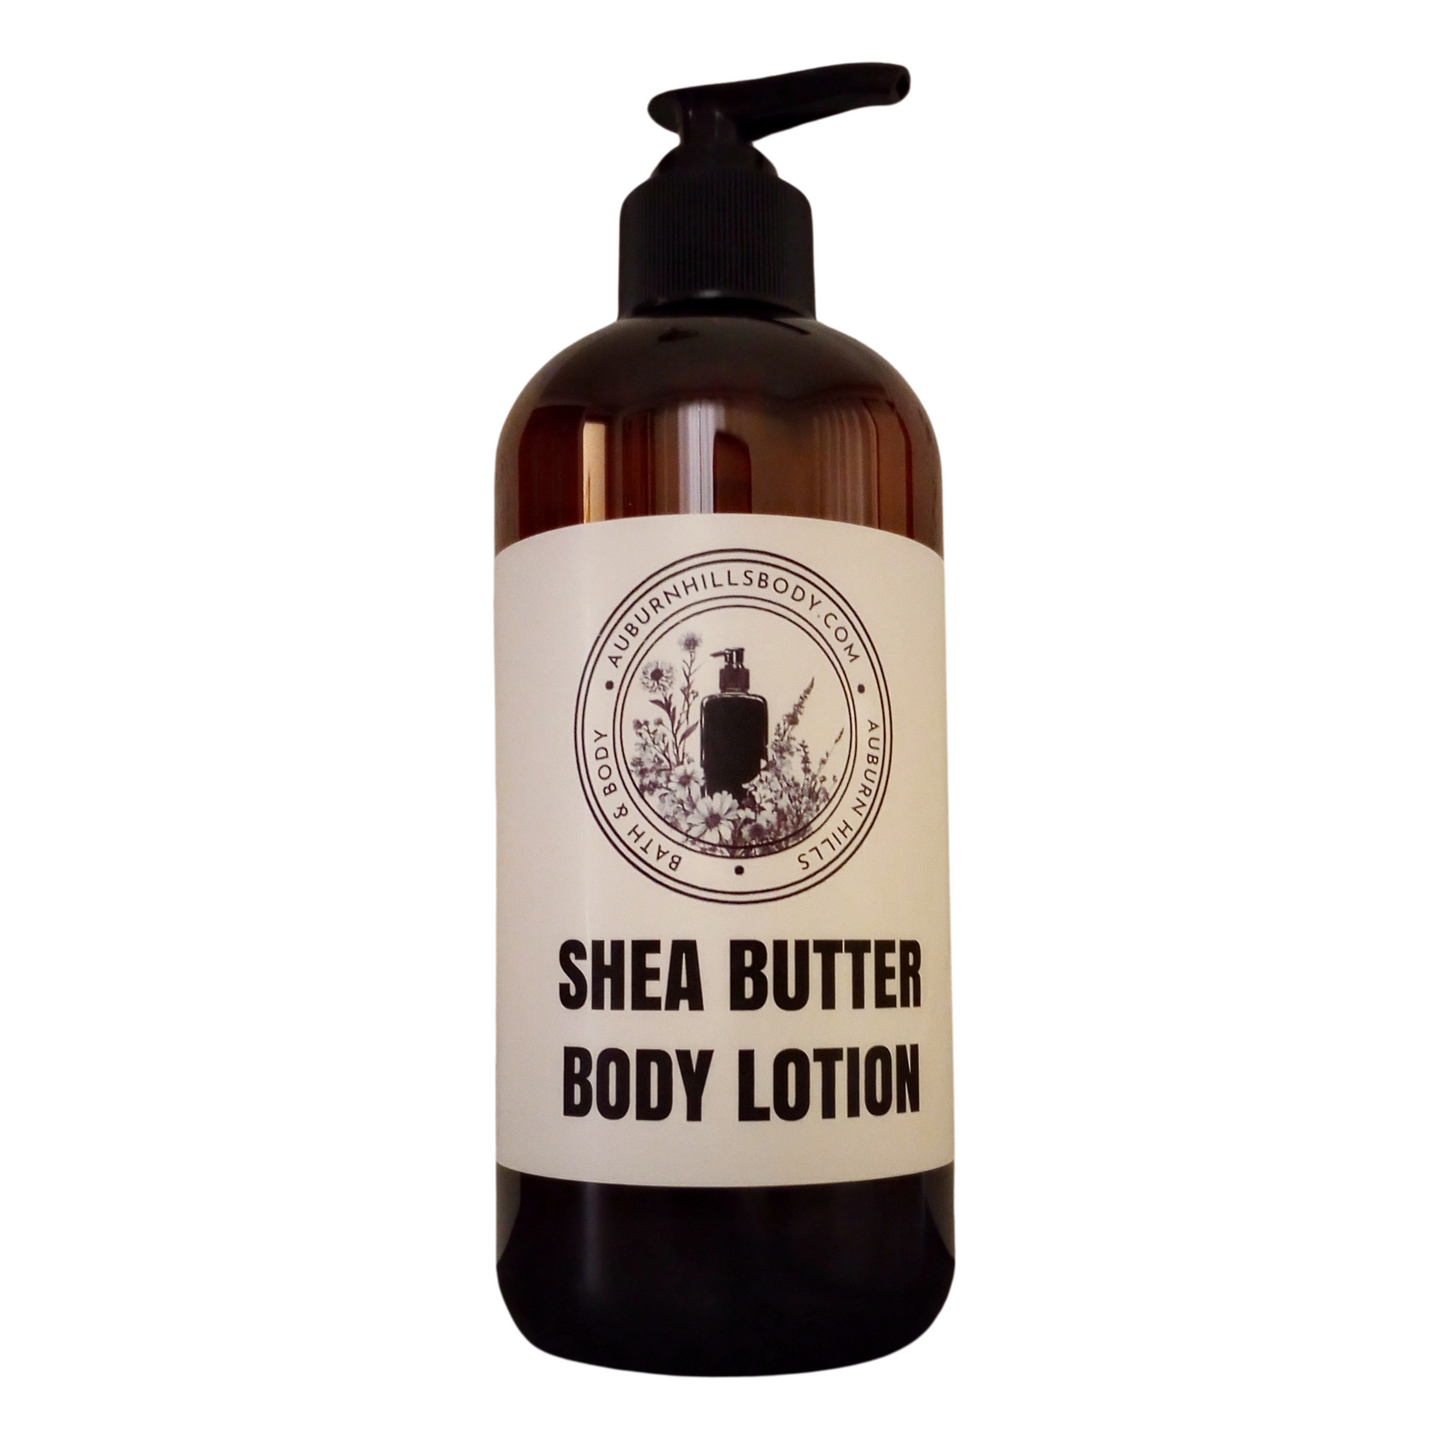 Auburn Hills Christmas Wreath Scented Shea Butter Body Lotion